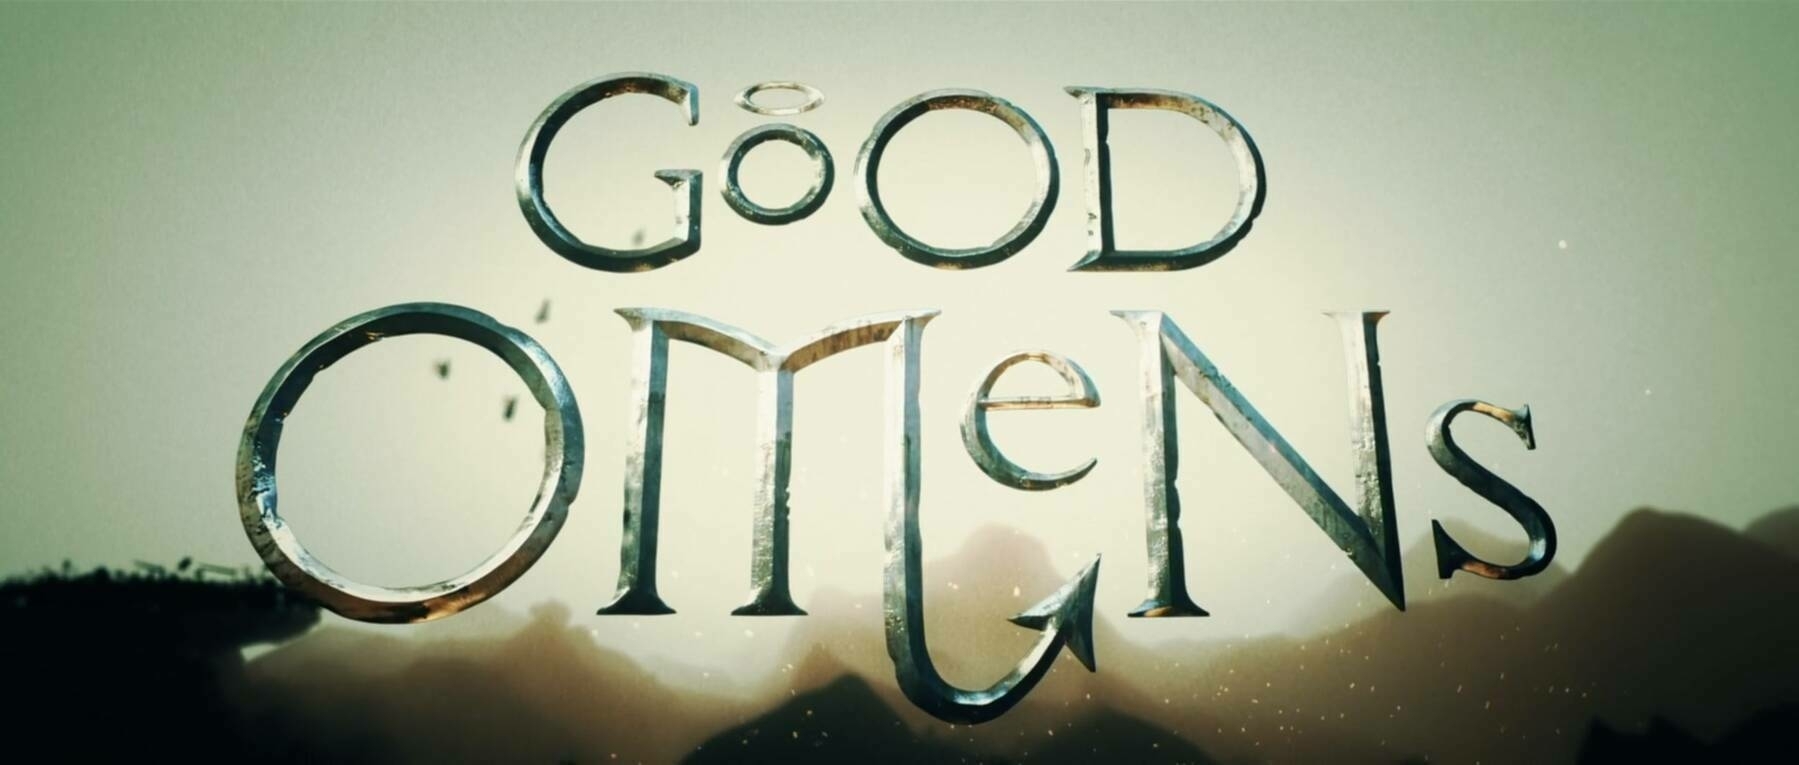 The title card for the tv show, Good Omens.